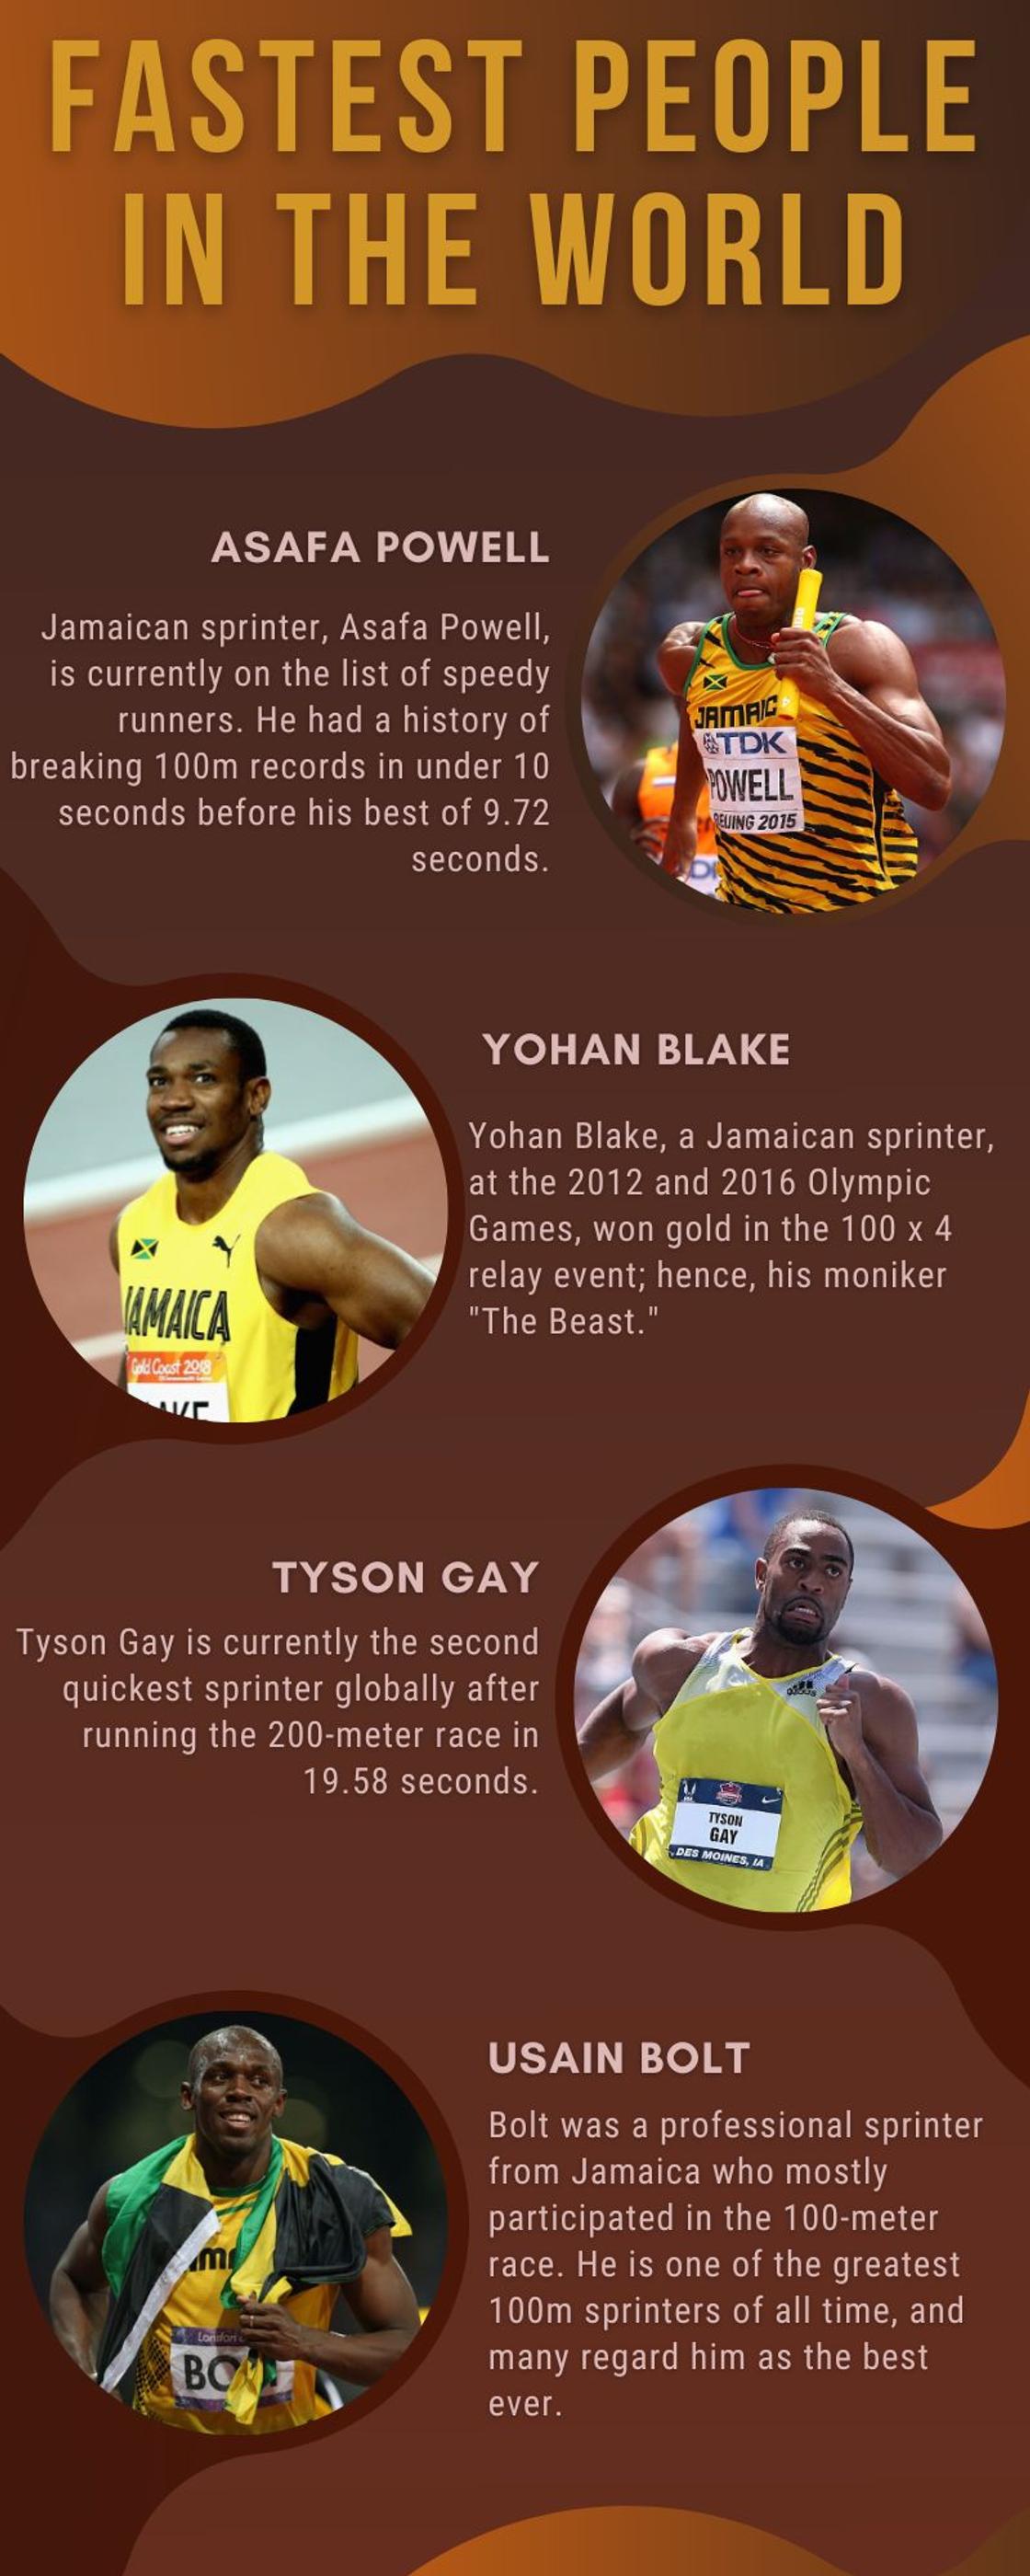 Fastest people in the world